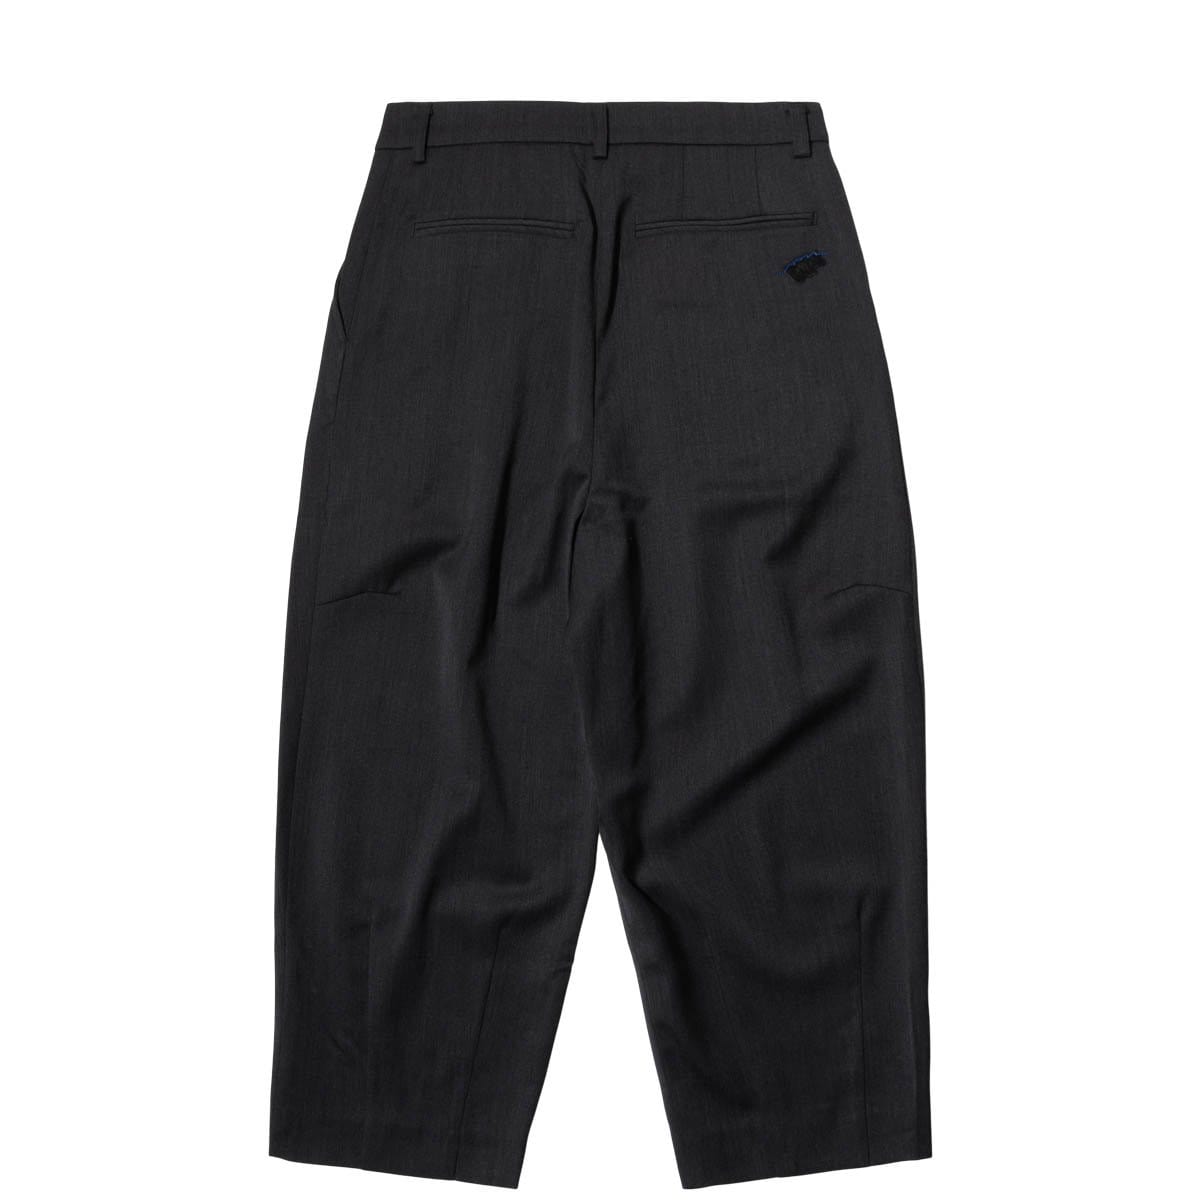 Ader Error Bottoms TROUSERS